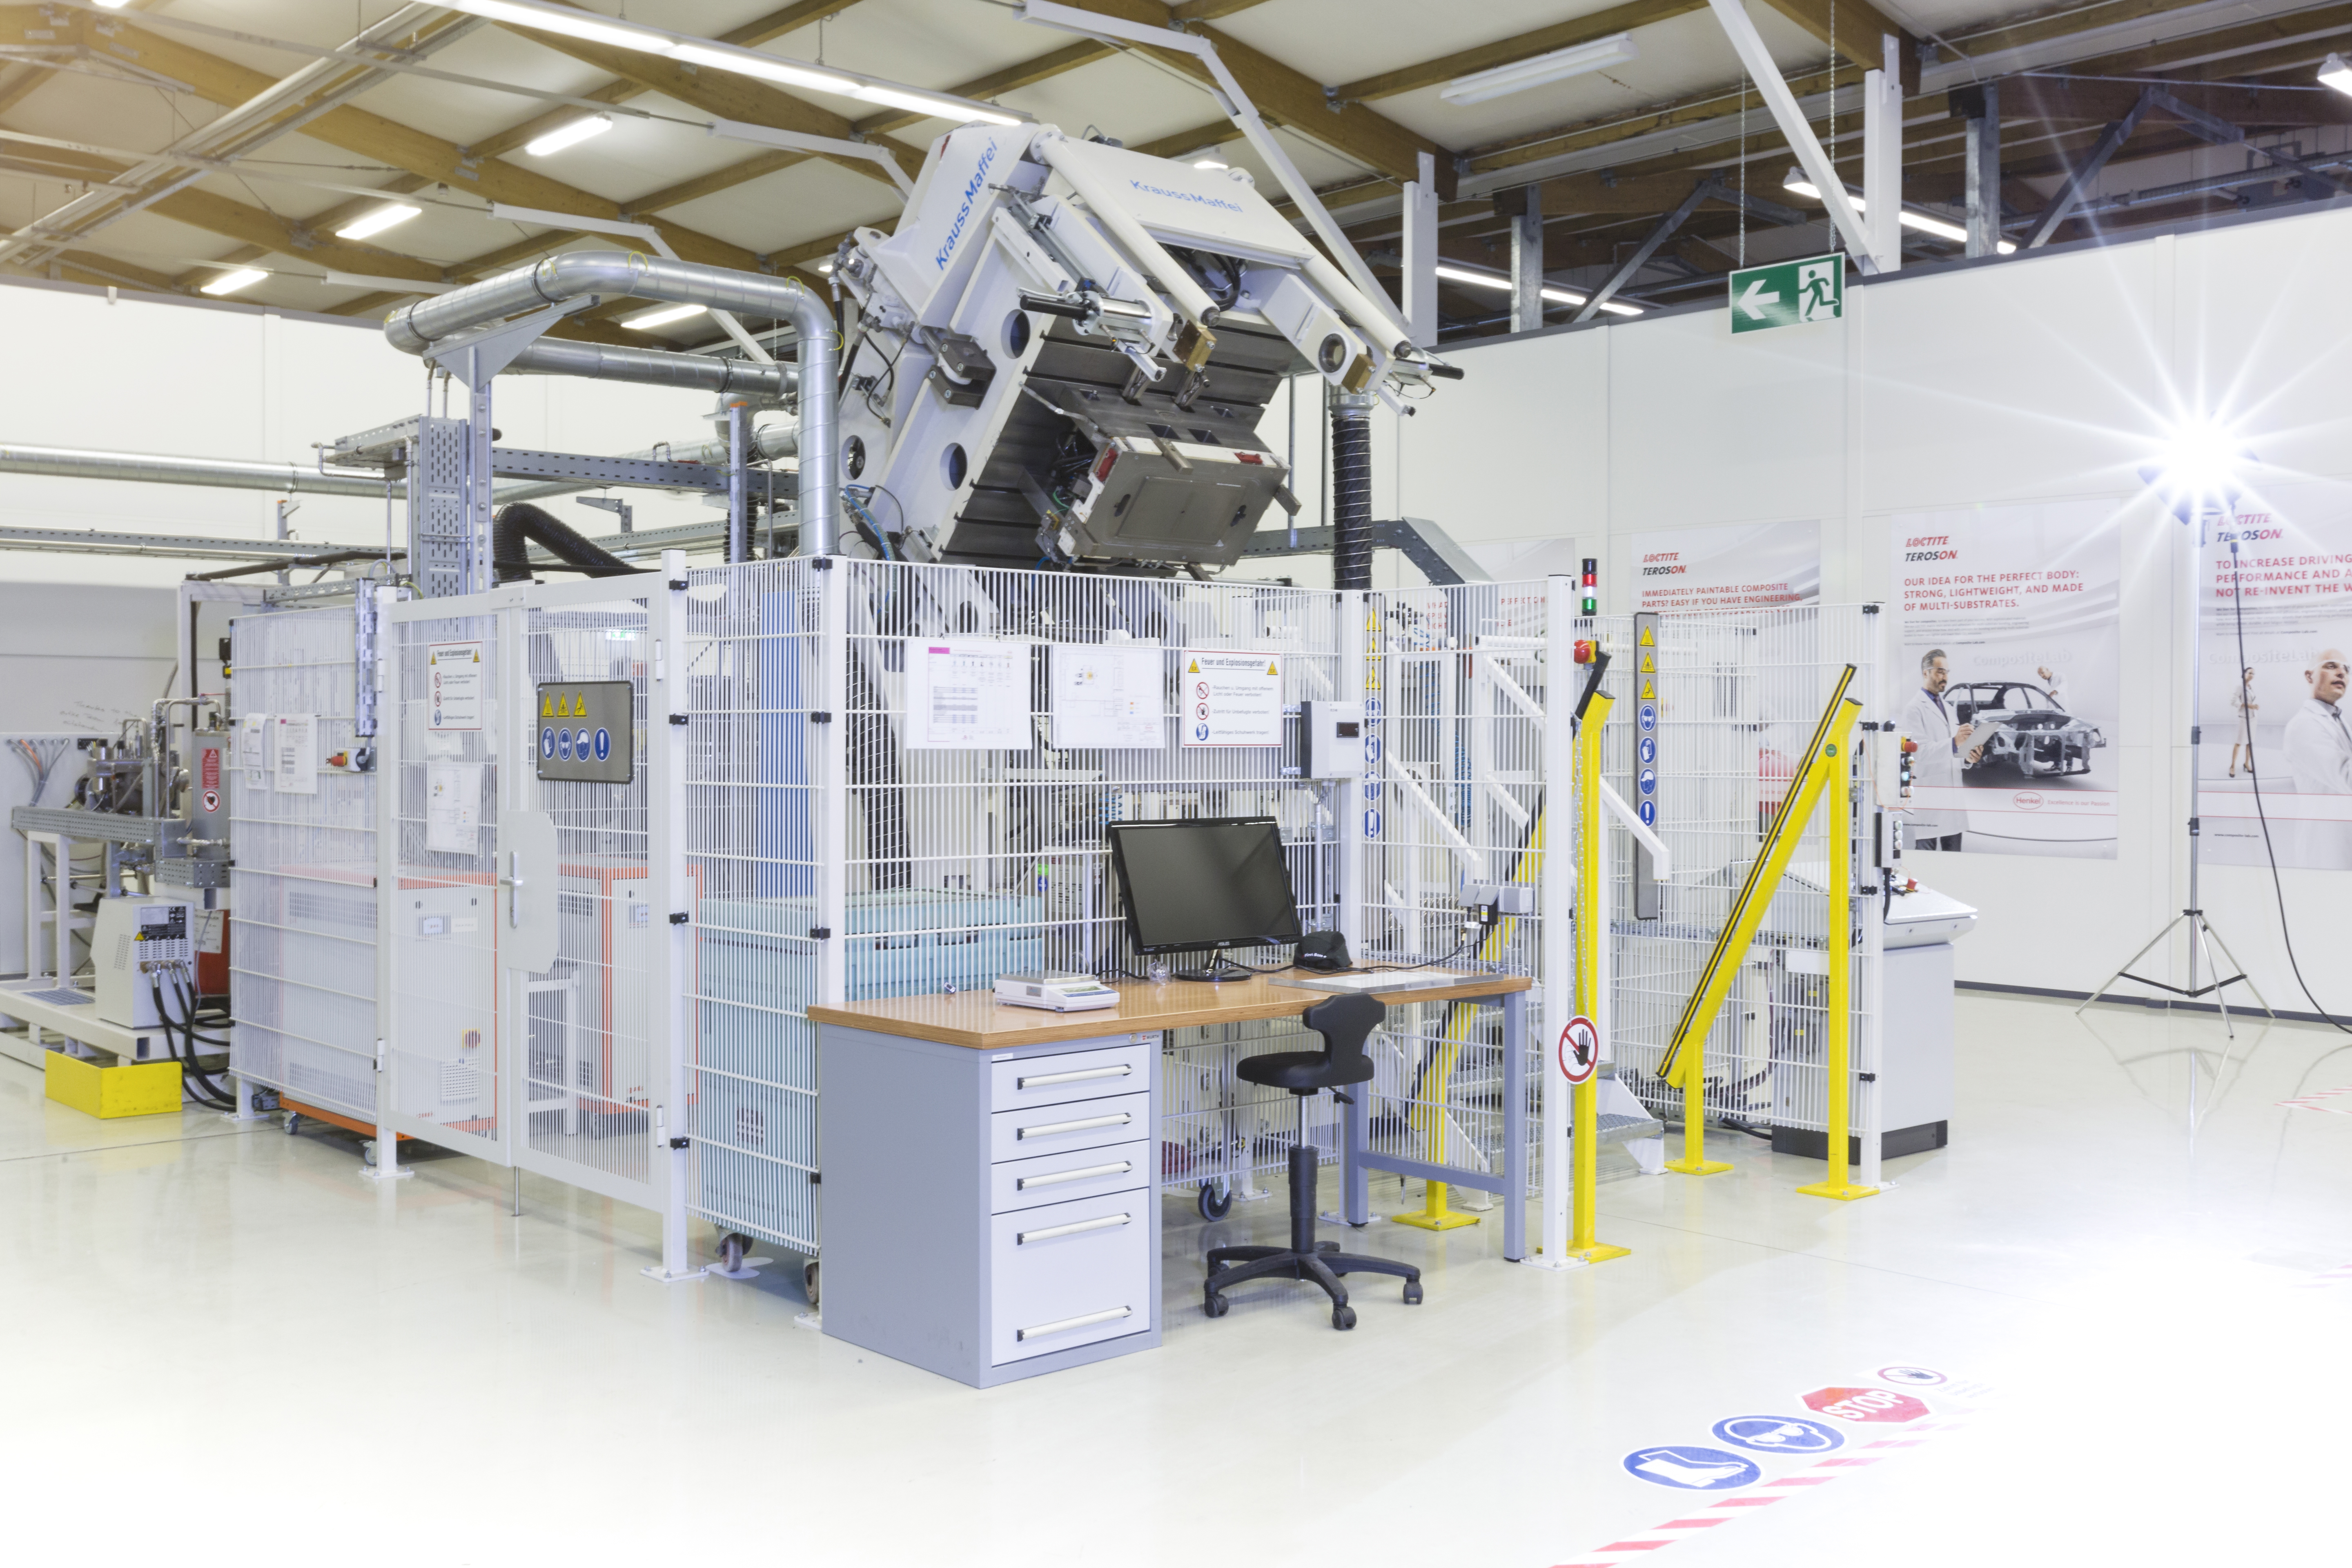 Henkel’s HP-RTM equipment, located at Henkel’s Composite Lab in Heidelberg (Germany), has resin injection units for polyurethanes and epoxies coupled to a 380-tonne press. (Photo courtesy Henkel.)